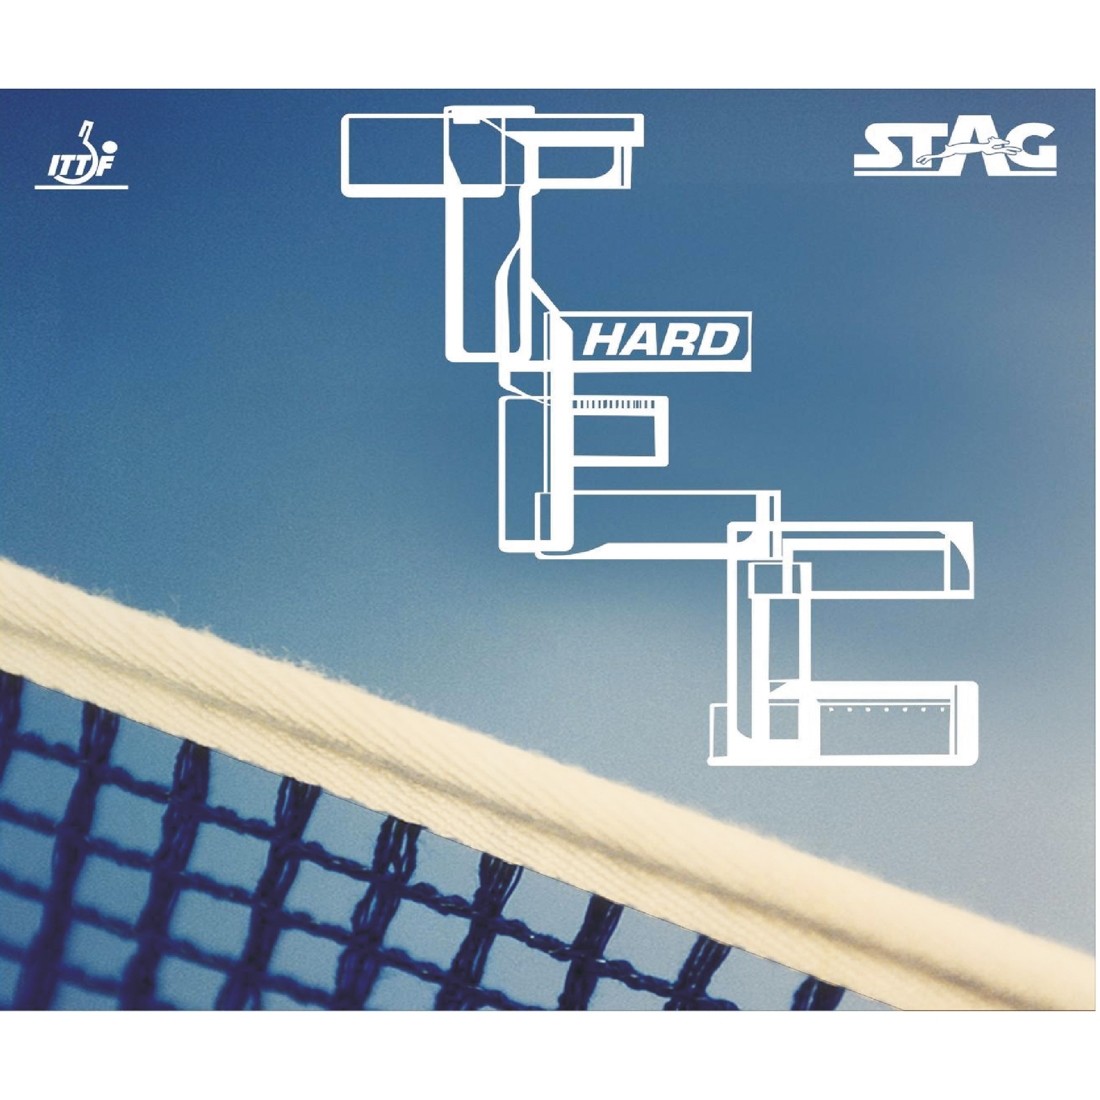 STAG TT RUBBER TEC SOFT 2.0MM RED